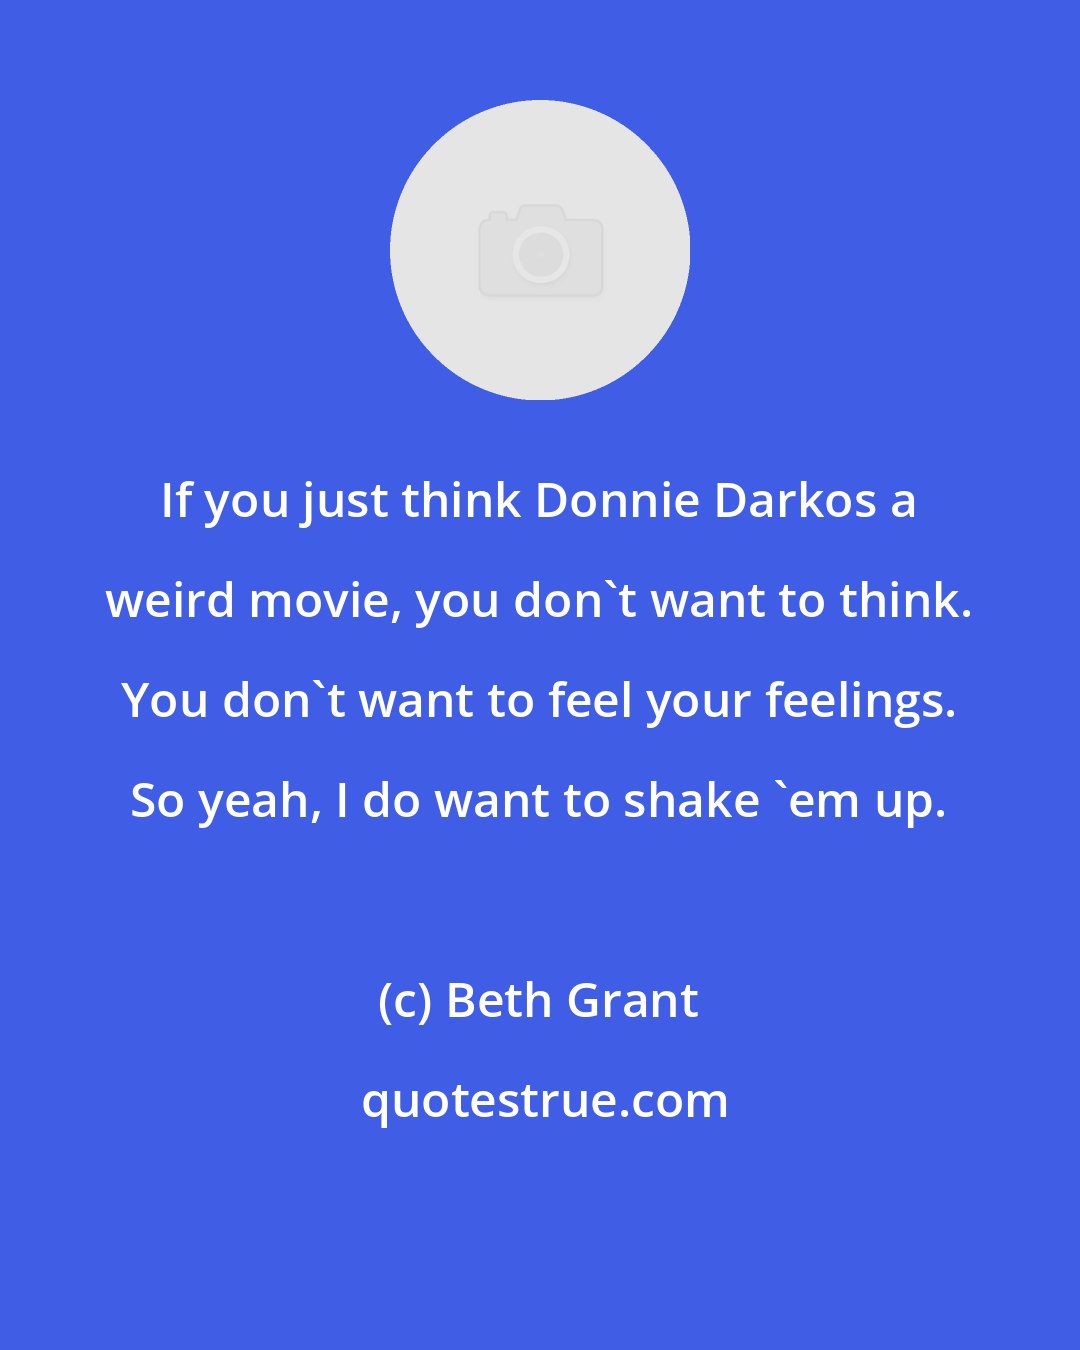 Beth Grant: If you just think Donnie Darkos a weird movie, you don't want to think. You don't want to feel your feelings. So yeah, I do want to shake 'em up.